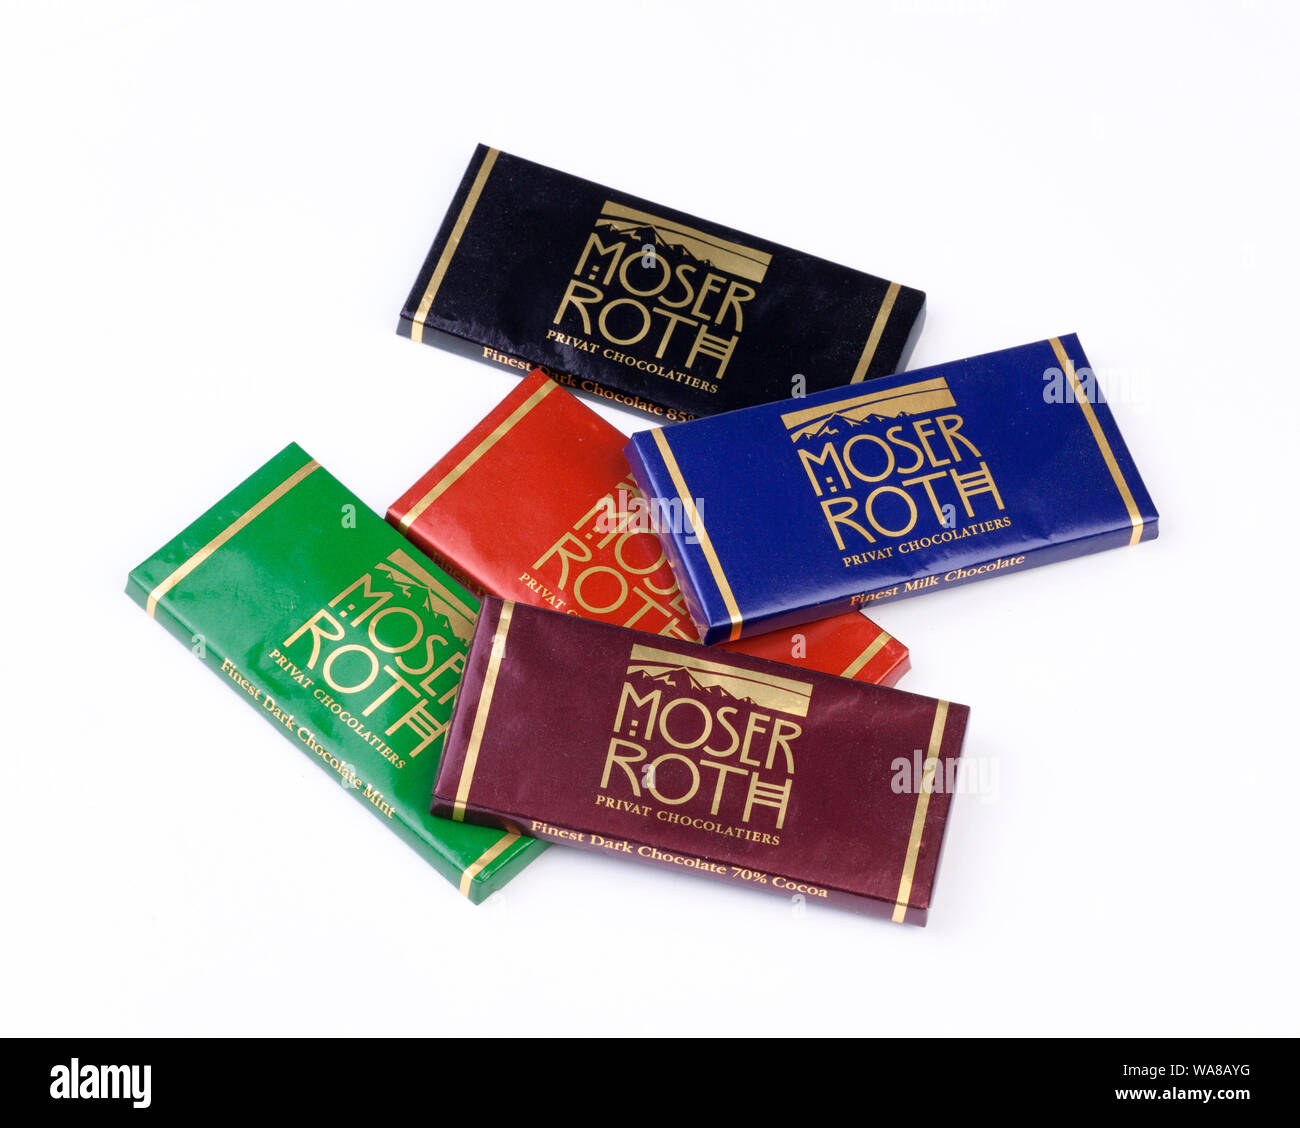 Moser Roth dark chocolate sold exclusively by Aldi Stock Photo